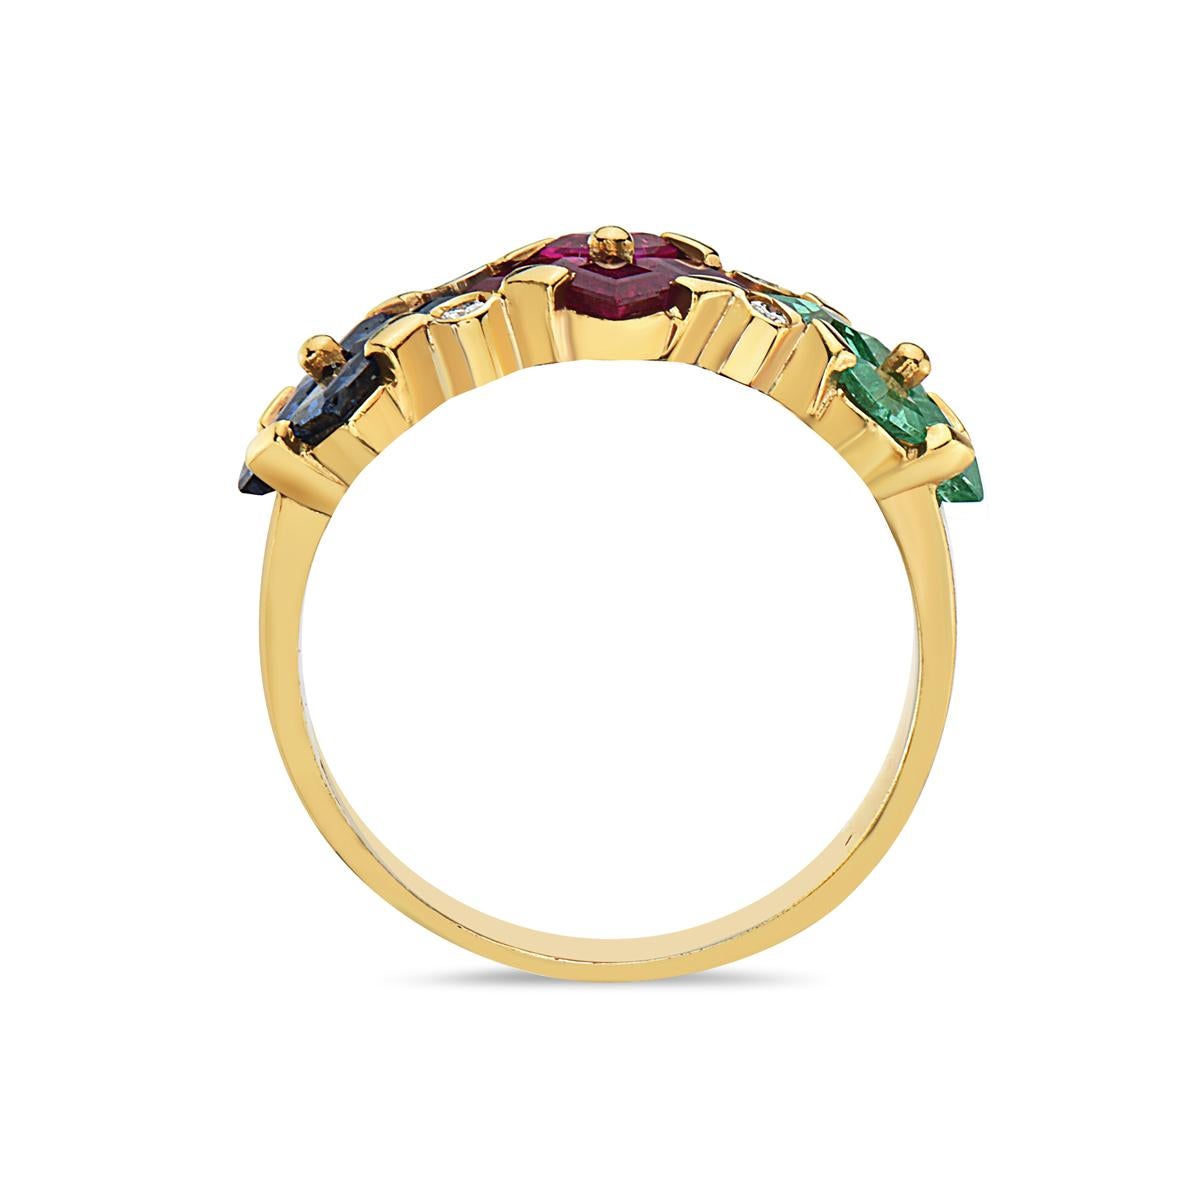 This ring features a mix of ruby, sapphire, emerald, and diamonds set in 14K yellow gold. 4.6 grams total weight. Size 7 3/4.

Viewings available in our NYC showroom by appointment.